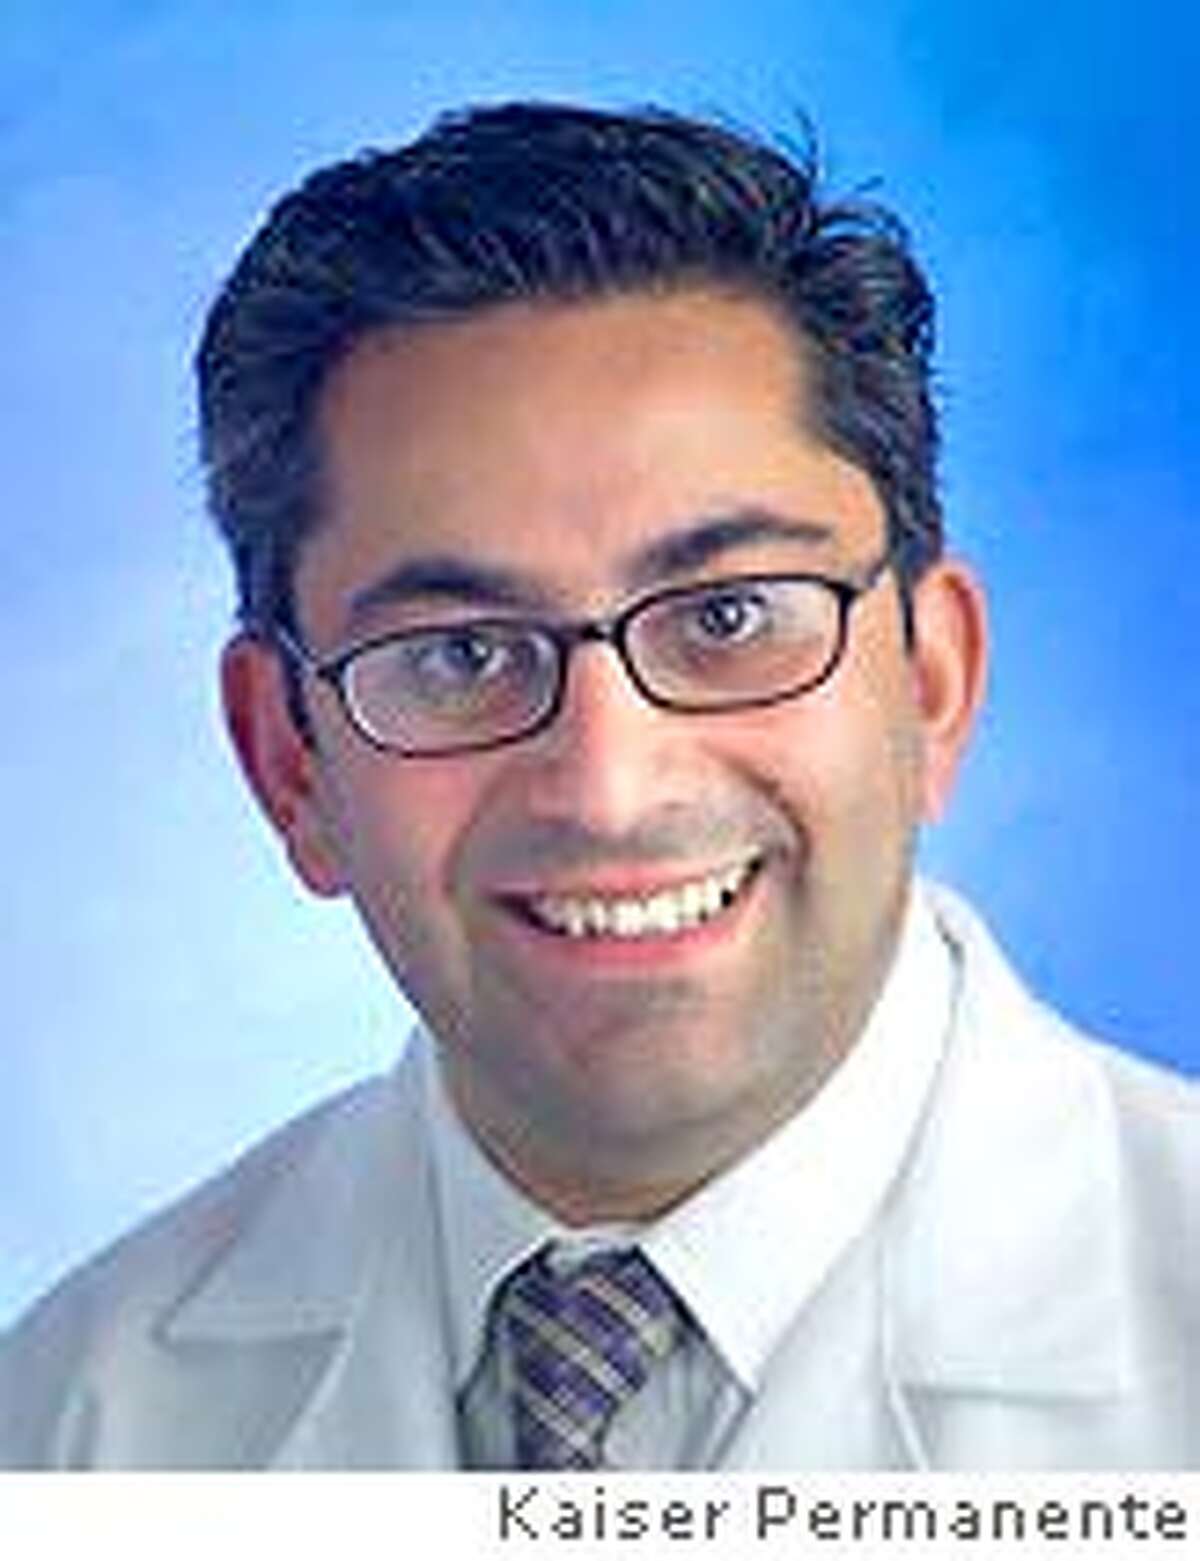 This undated photo released by Kaiser Permanente shows Dr. Hootan Roozrokh, 33, of San Francisco, who is accused of prescribing excessive drugs to a disabled patient to speed up his death and harvest his organs. Roozrokh was charged Monday, July 30, 2007, in the first such criminal case against a transplant doctor in the U.S., the San Luis Obispo county district attorney's office said. (AP Photo/Kaiser Permanente) **NO SALES**